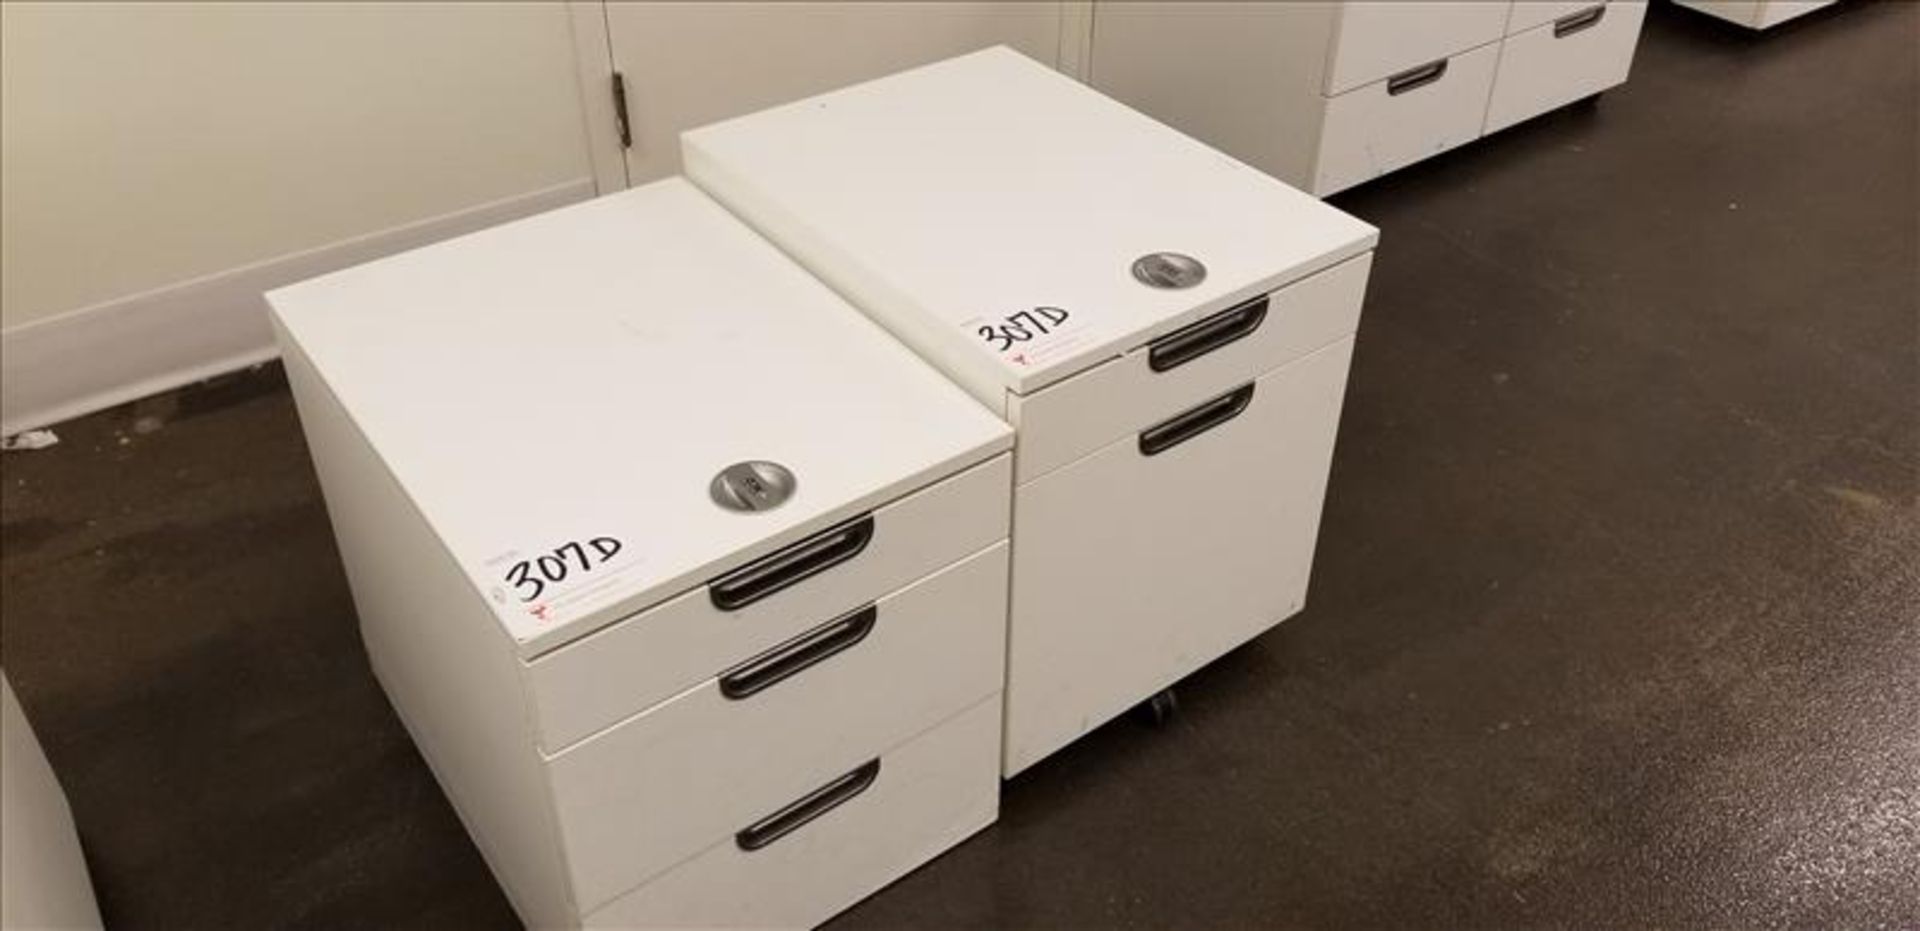 (2) 3-Drawer Mobile Vertical Filing Cabinets - Image 2 of 2